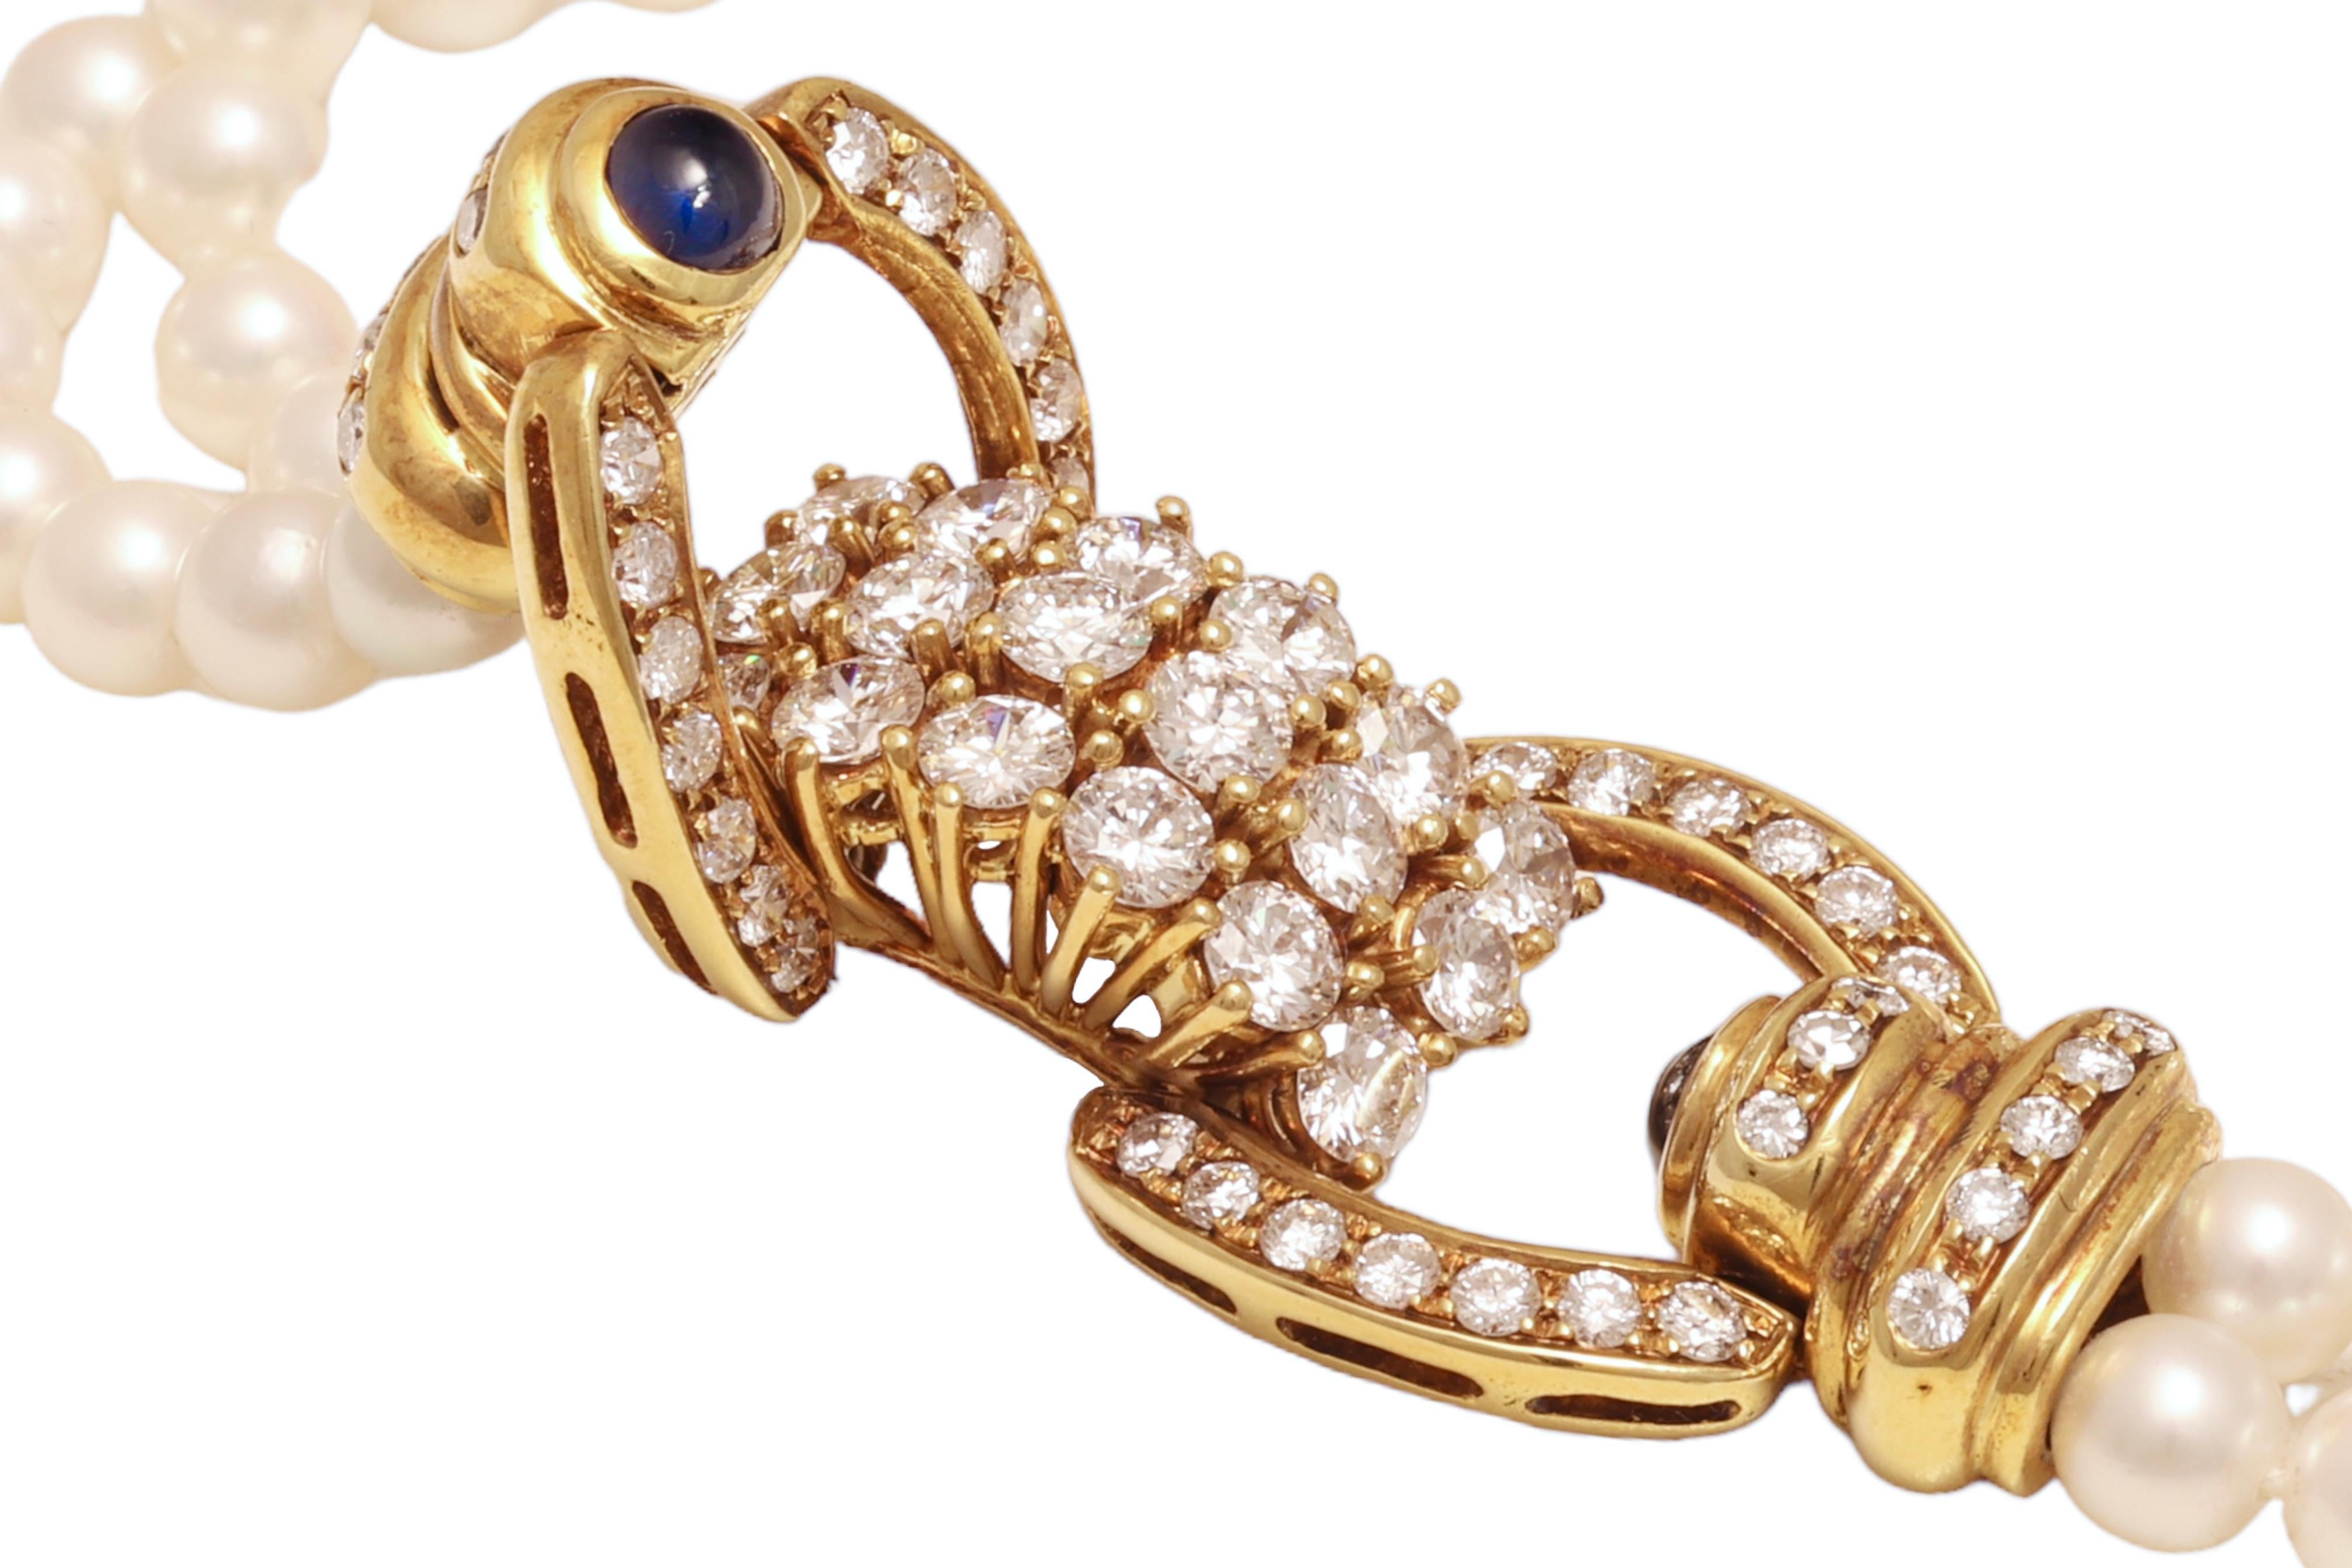 Brilliant Cut Pearl Bracelet in 18kt Yellow Gold Set With 3.58ct. Diamonds, Pearls & Sapphires For Sale